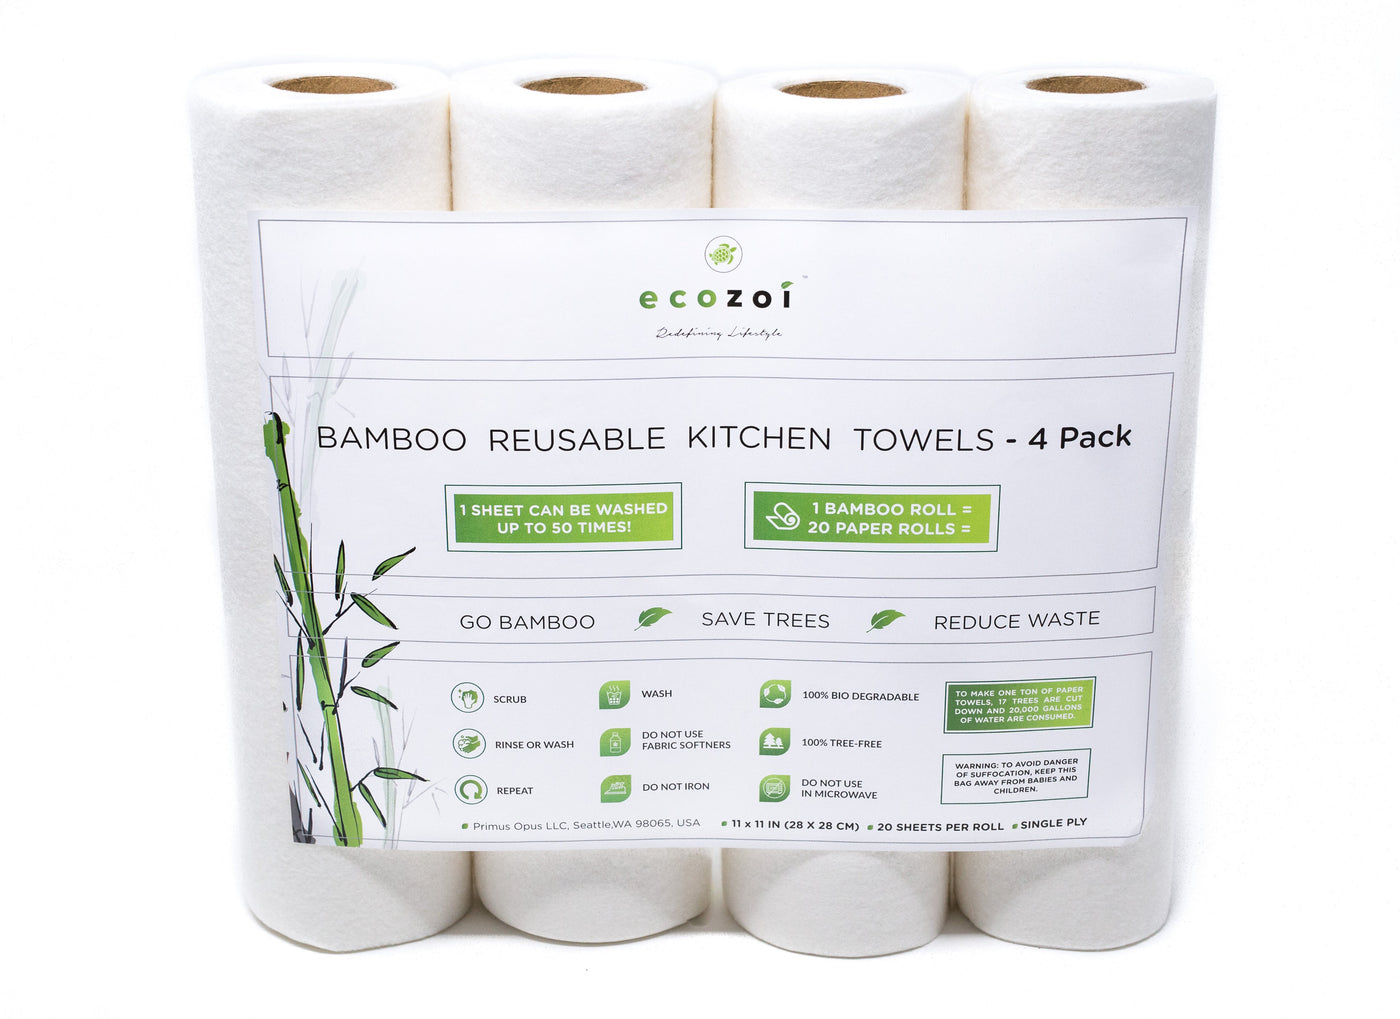 Bamboo kitchen Paper Towels, Reusable Tree-Free Paper Towels, 4 Pack freeshipping - ecozoi